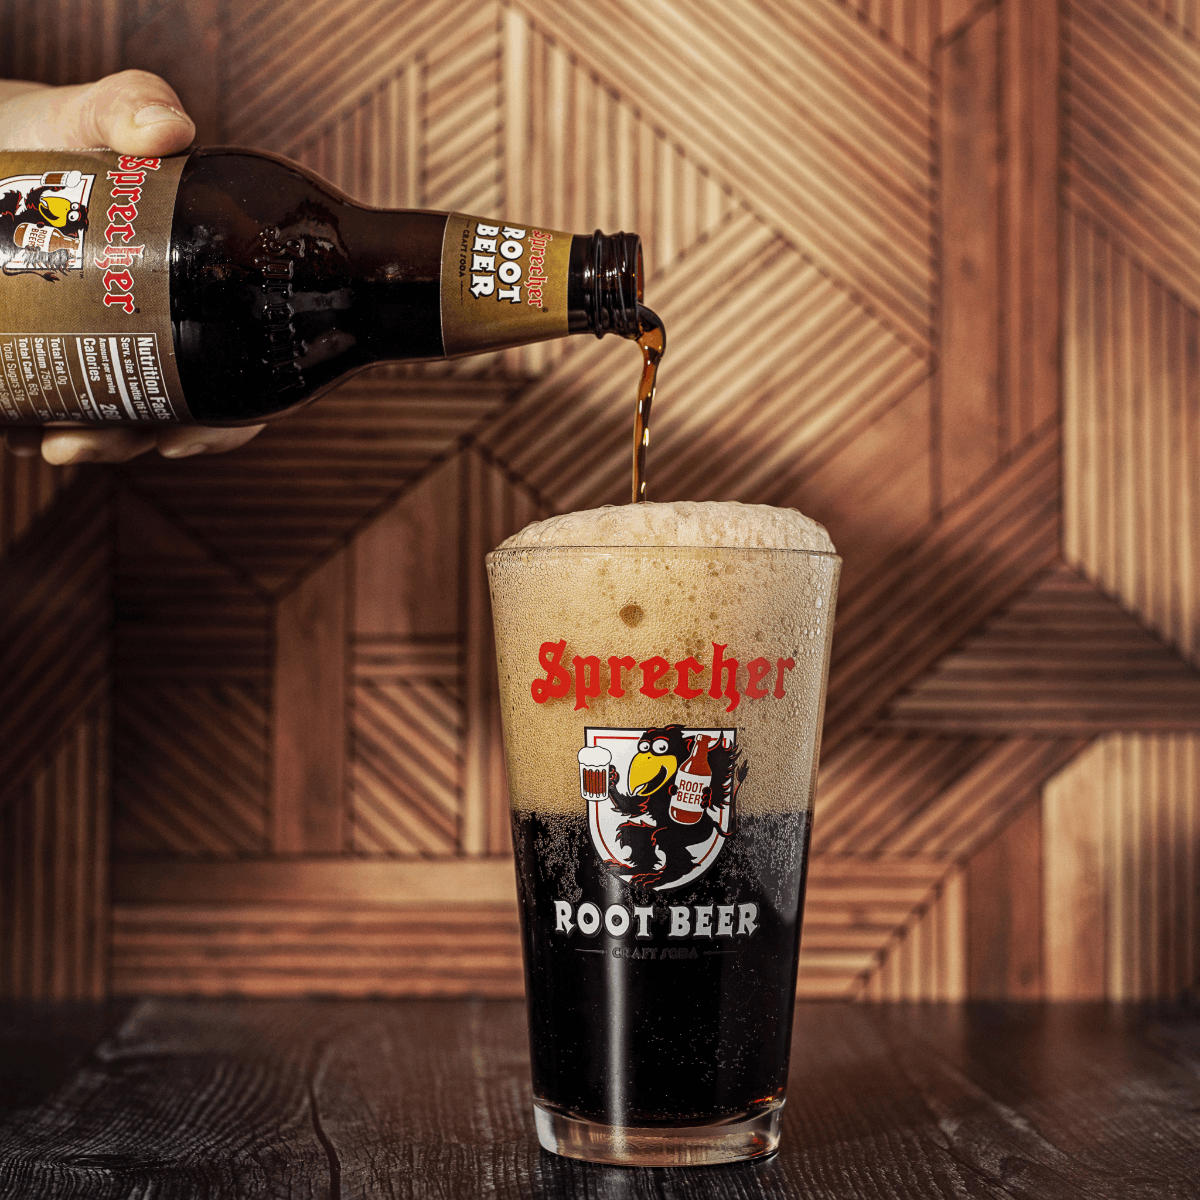 Sprecher Root Beer being poured into a pint glass